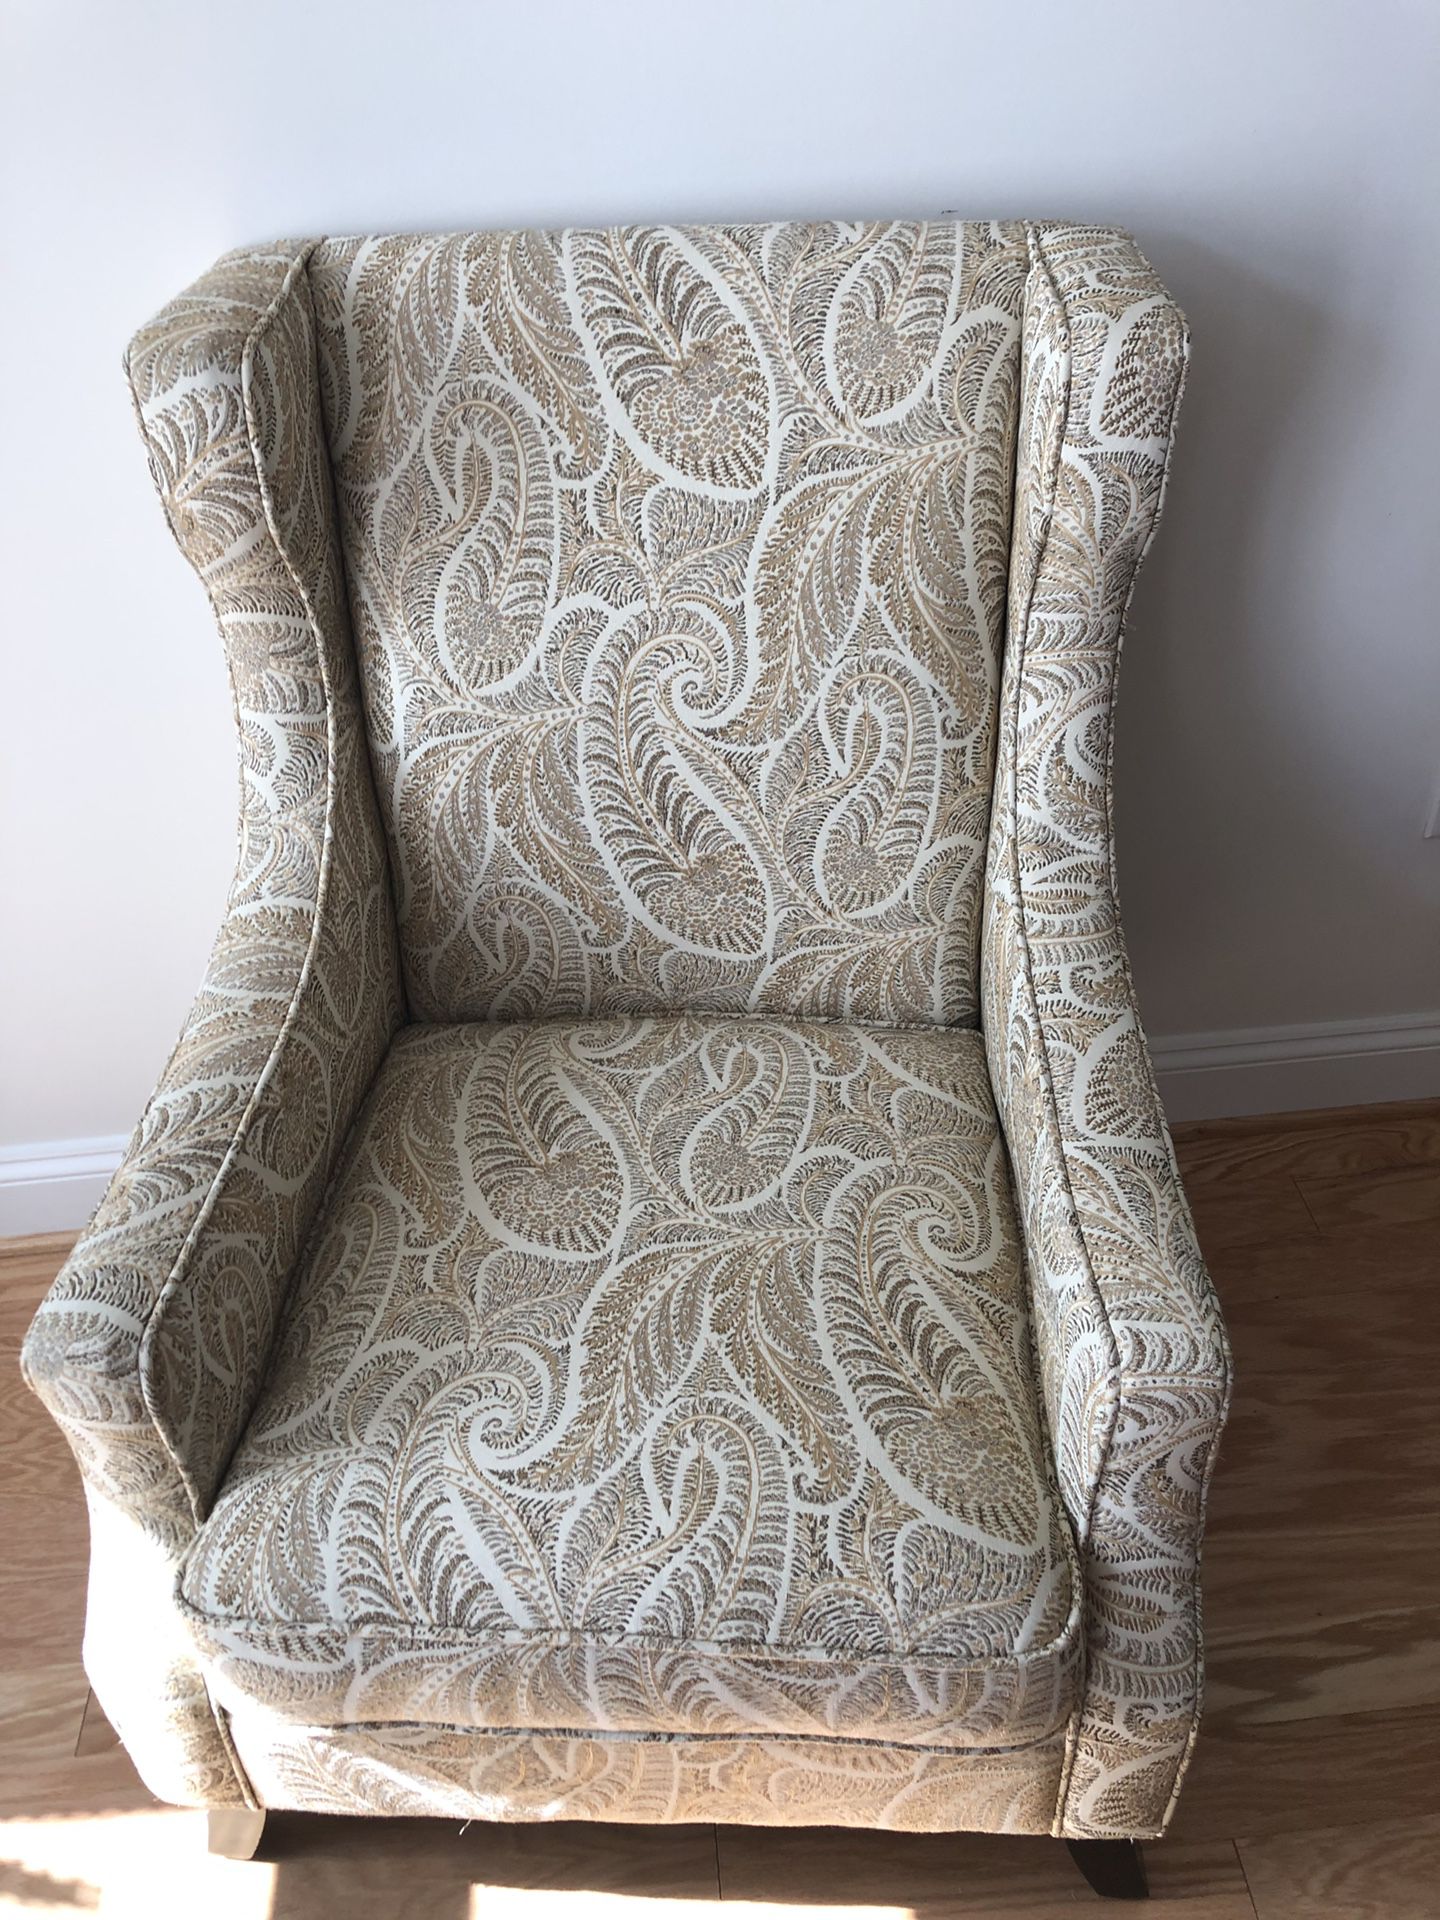 Pier 1 Alec Wingback Chairs (Set of 2) Reg Priced $449.95 each now $250 for two $125 for one